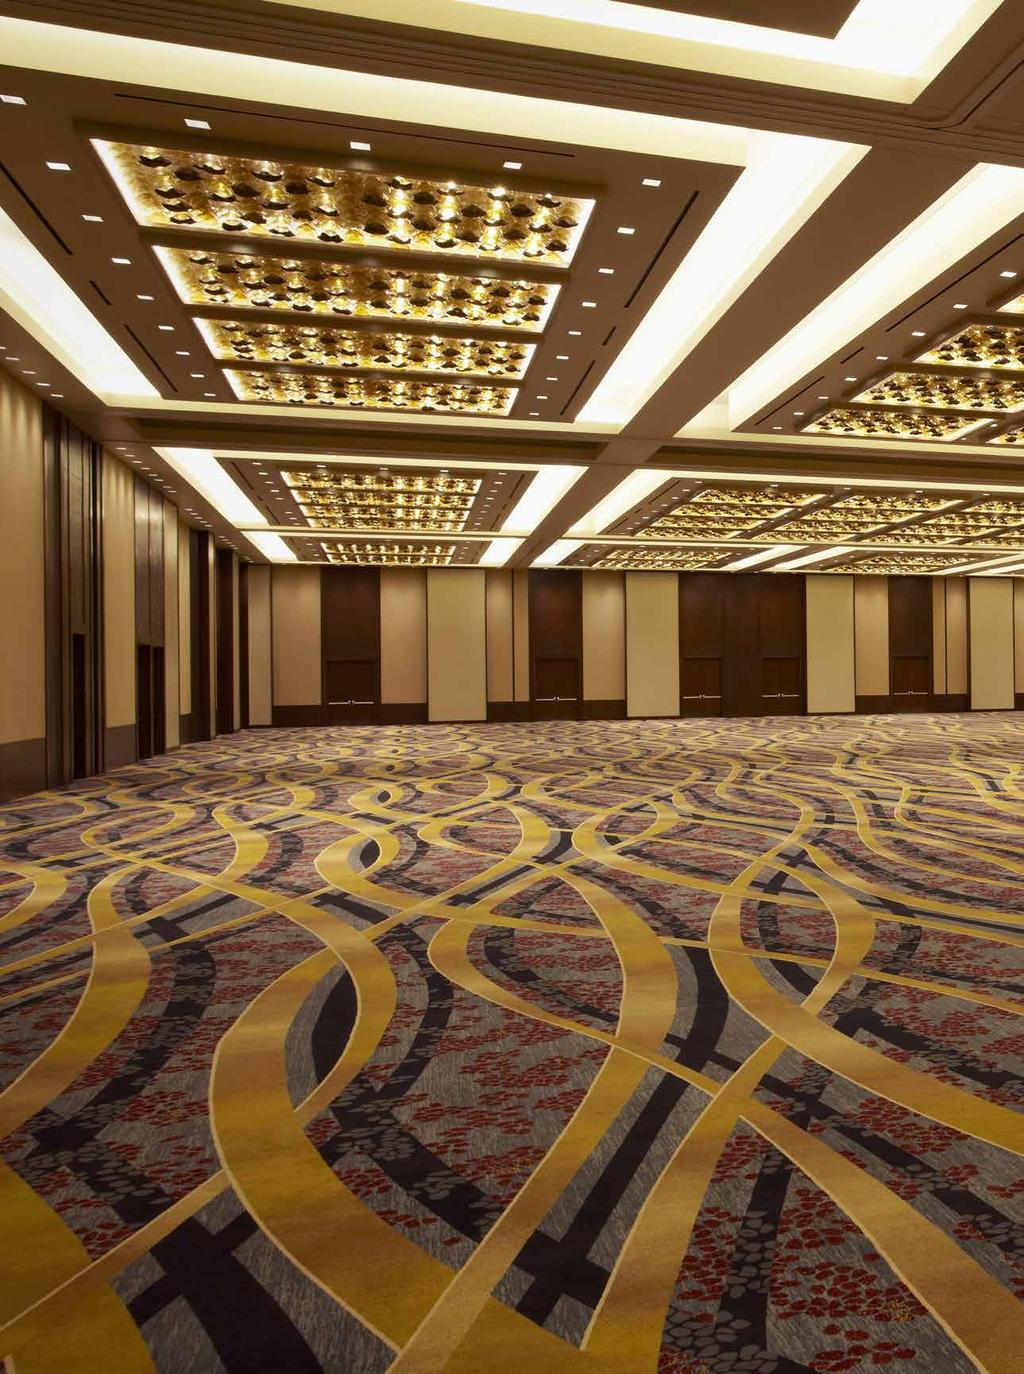 EETING CONVENIENCE e offer more than 105,000 square feet of space including the 30,600 square-foot arquis Ballroom.